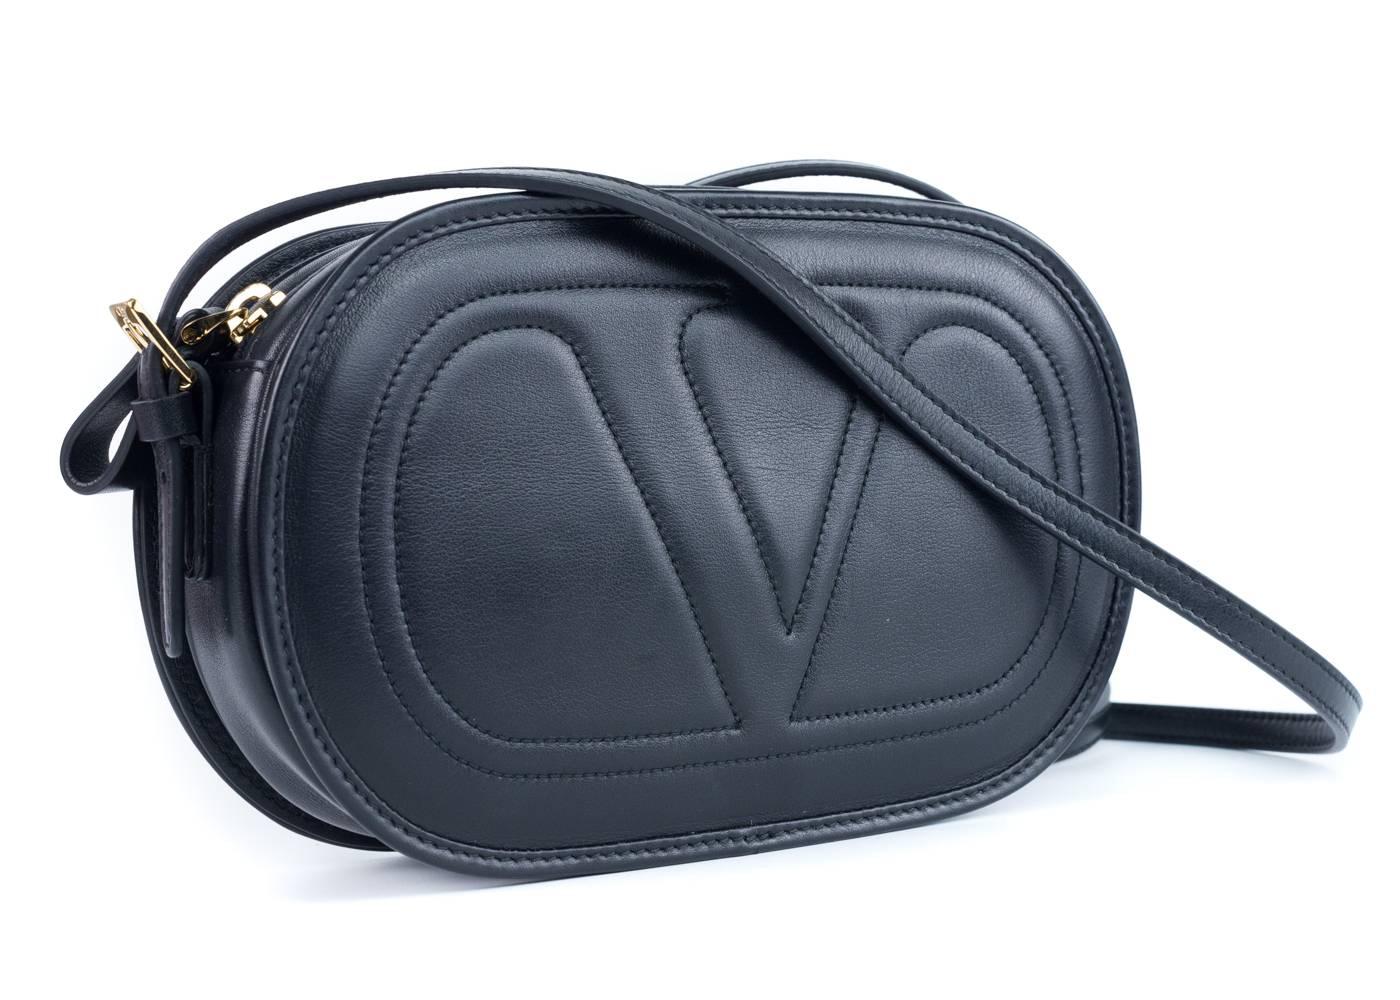 Brand New Valentino Crossbody Bag
Original Tags & Dust Bag Included
Retails in Stores & Online for $1975
Dimensions: 8.2